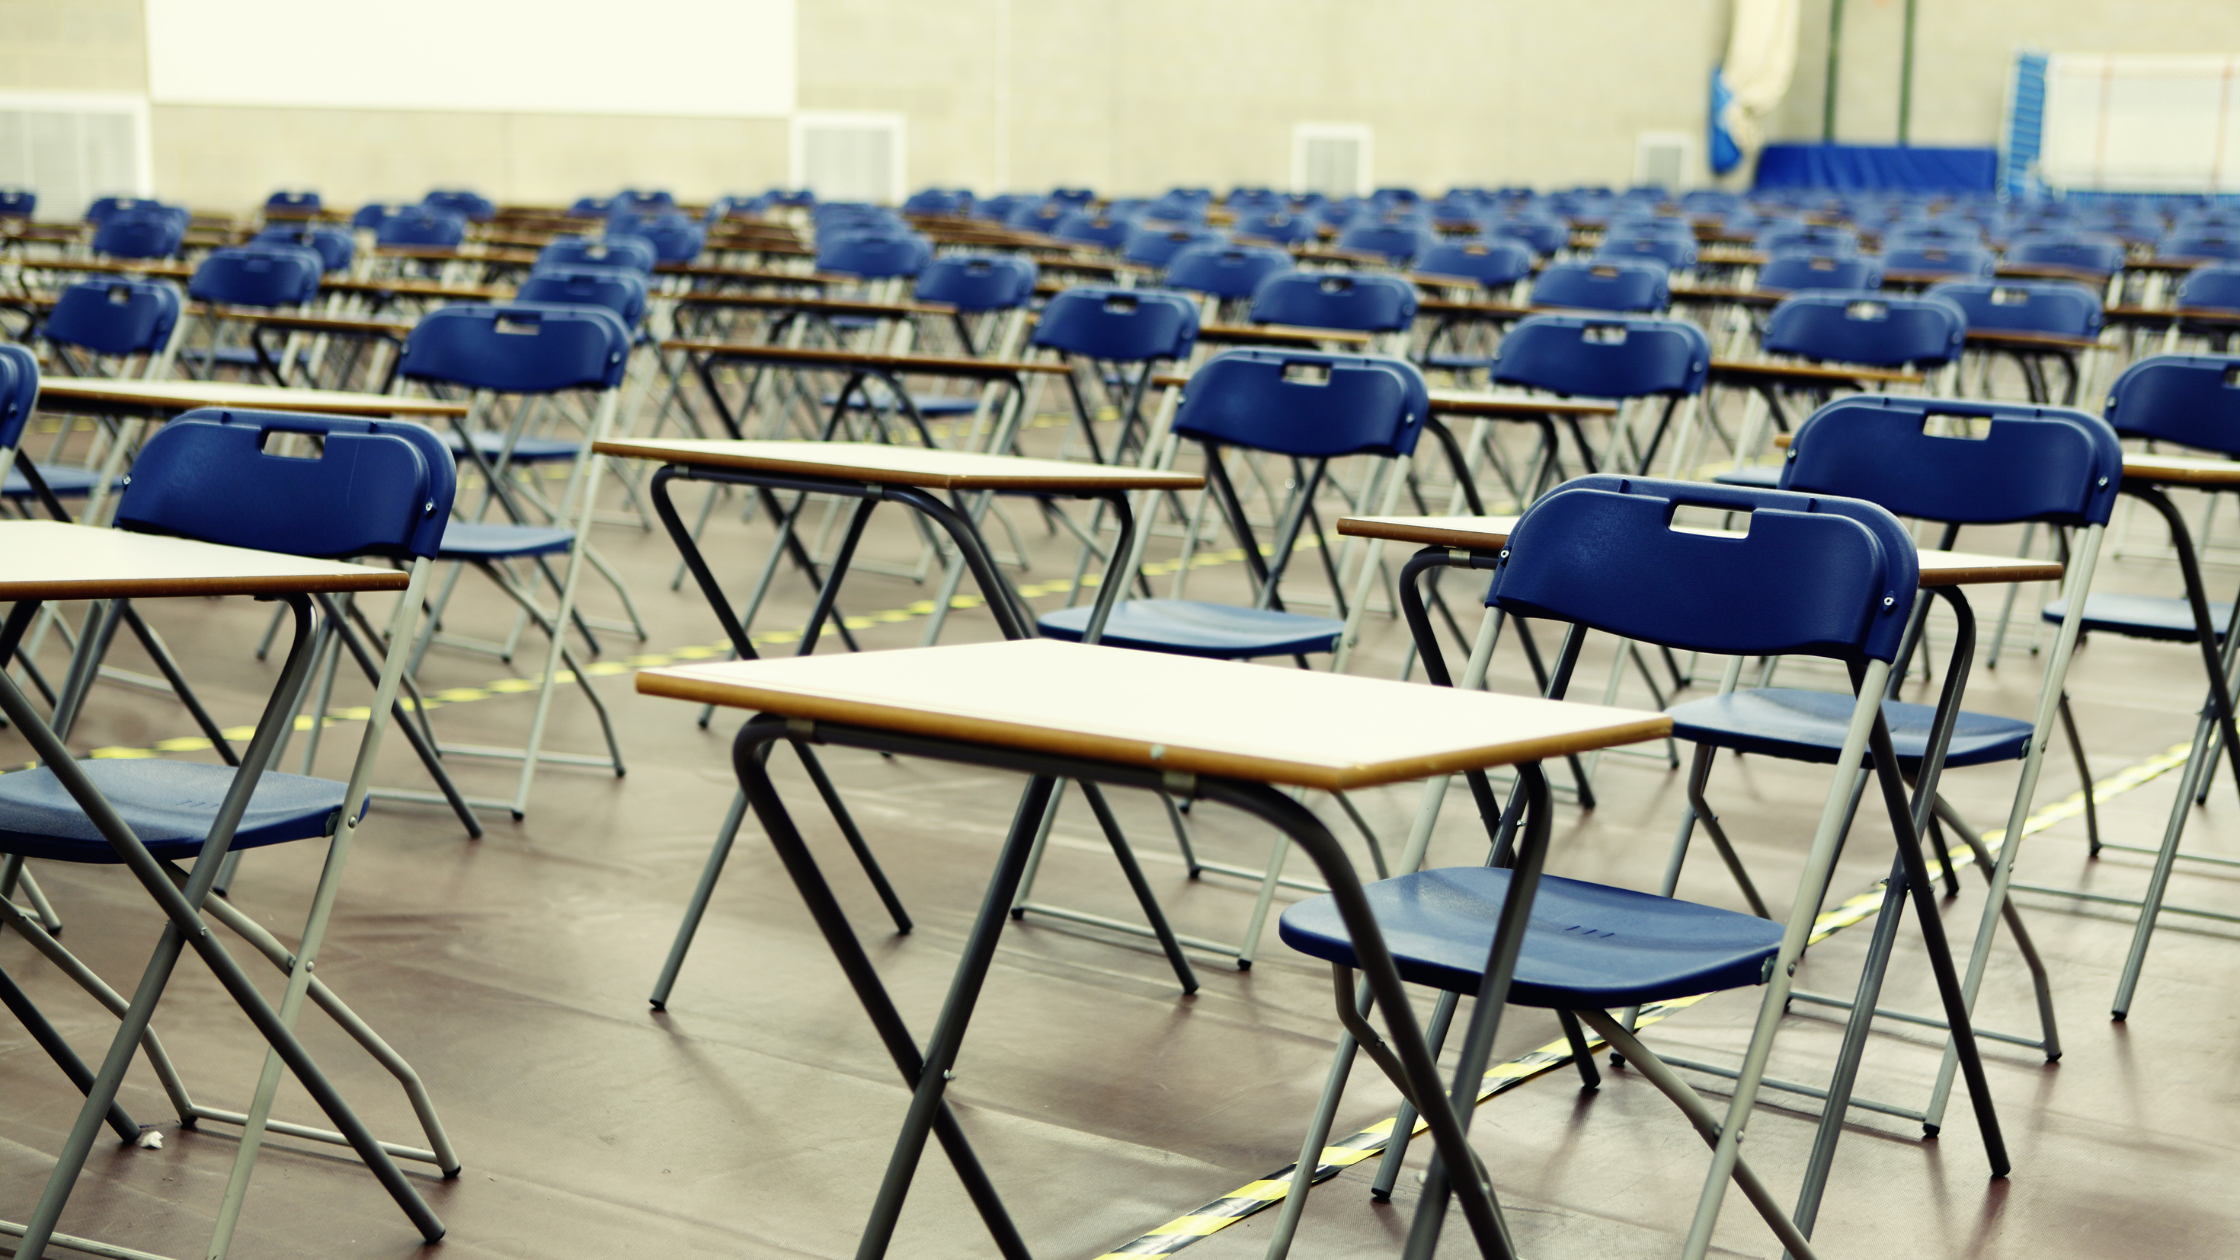 Flopped your Exam? How to Bounce Back After a Tough Test